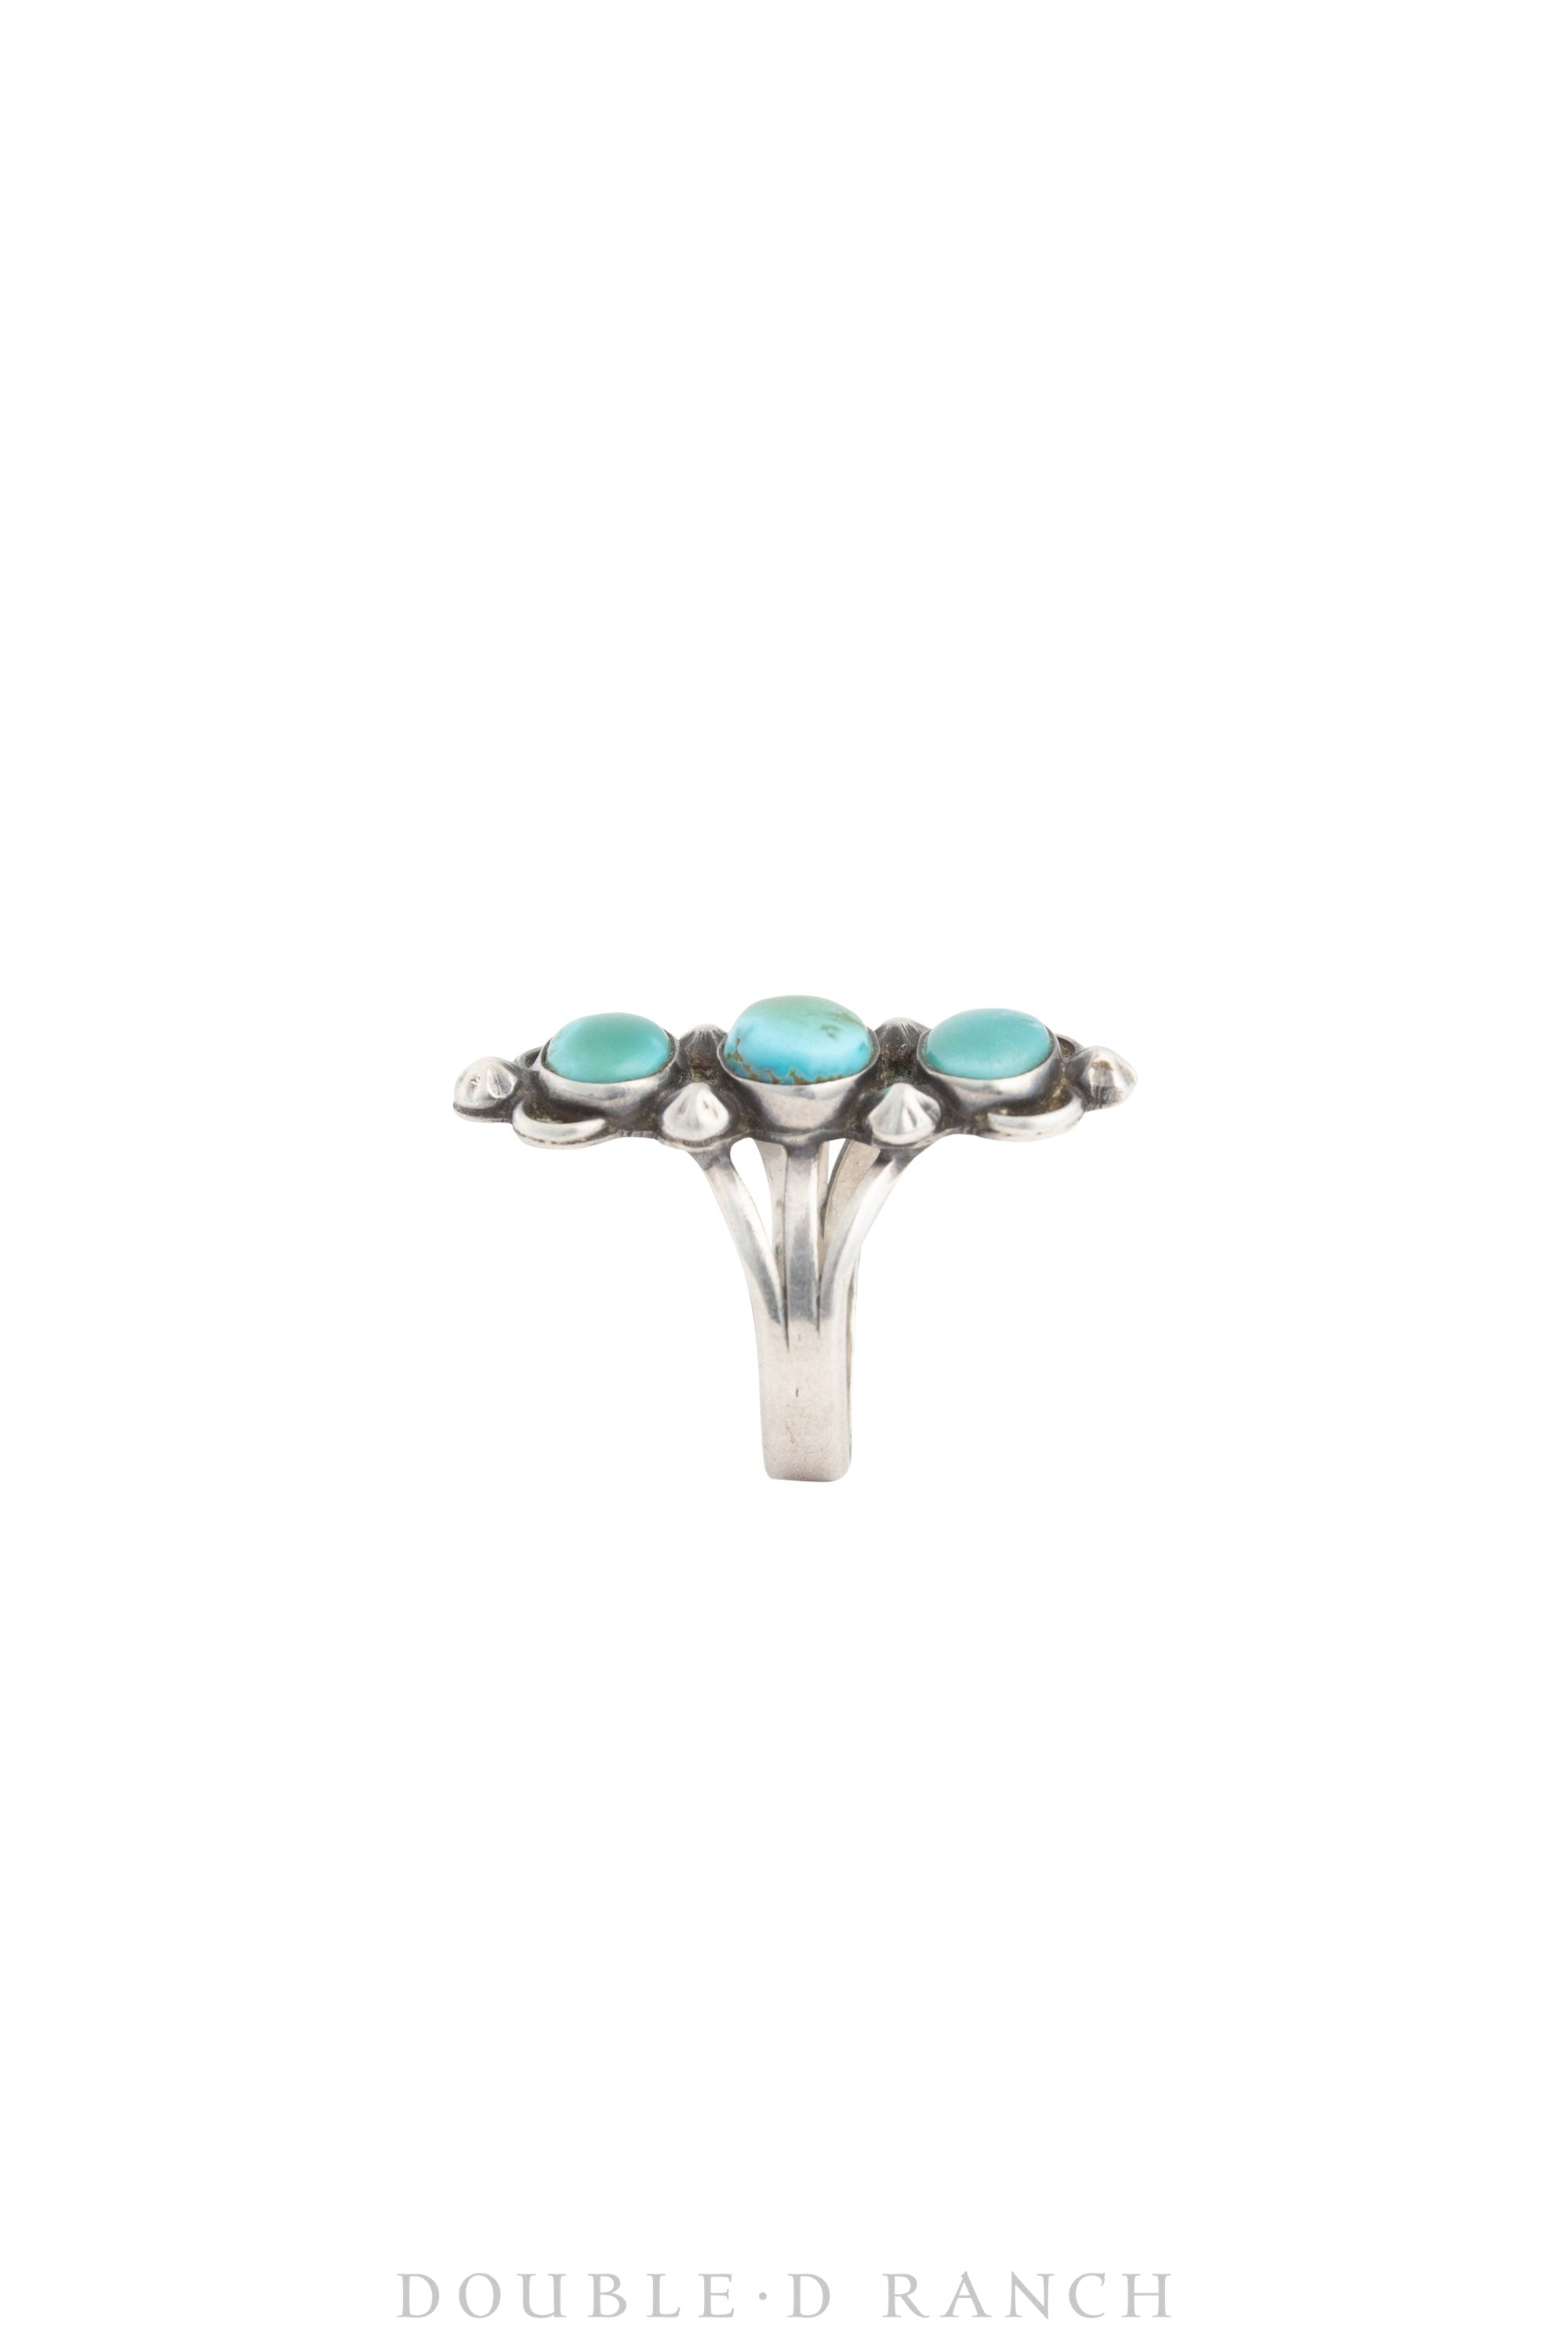 Ring, Natural Stone, Turquoise, Vintage ‘70s, 1382